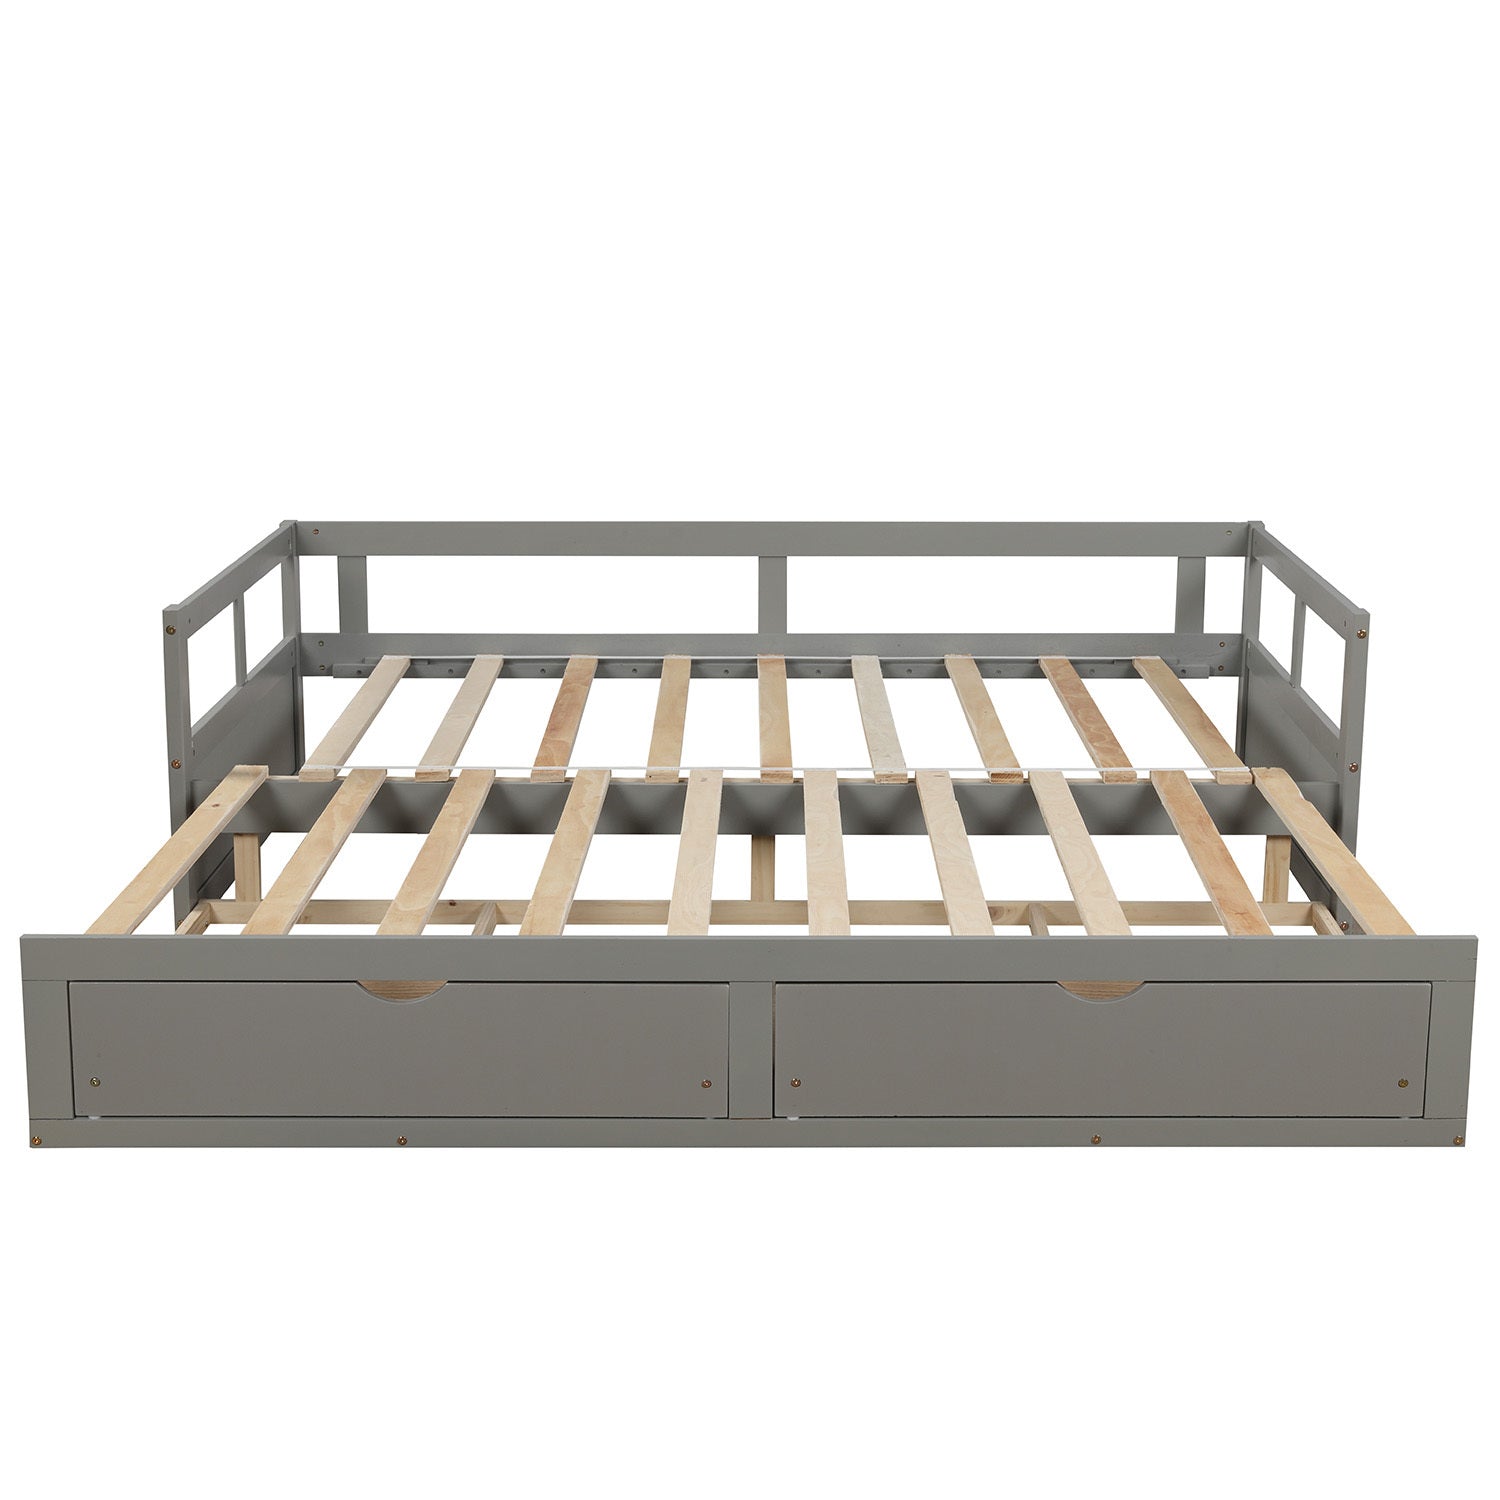 Extendable Daybed with Trundle Bed and Two Storage Drawers - Gray